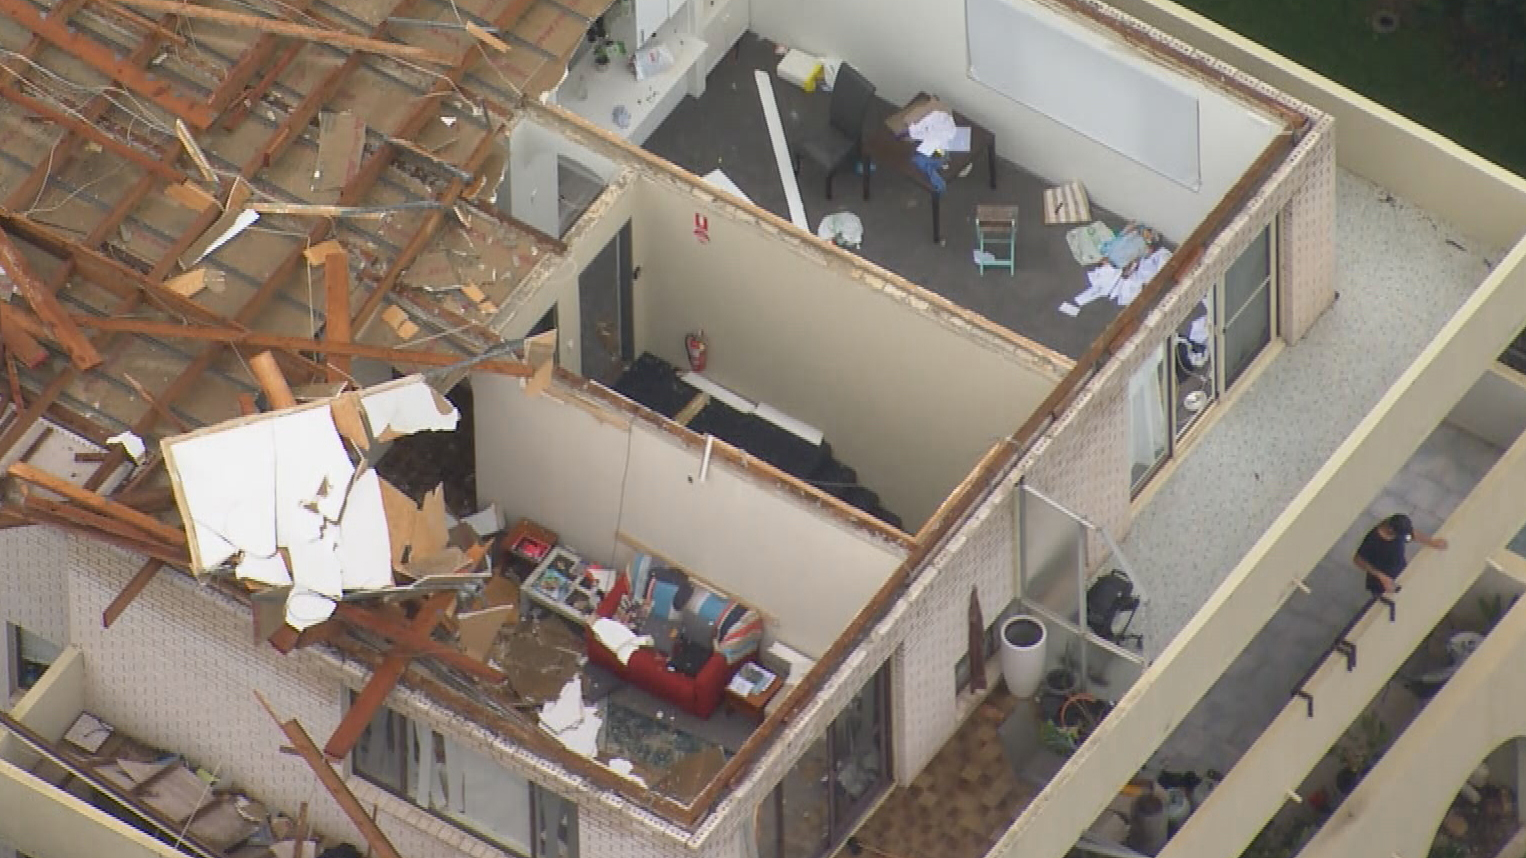 An apartment building had the roof ripped clean off in the storm on Sydney's northern beaches.